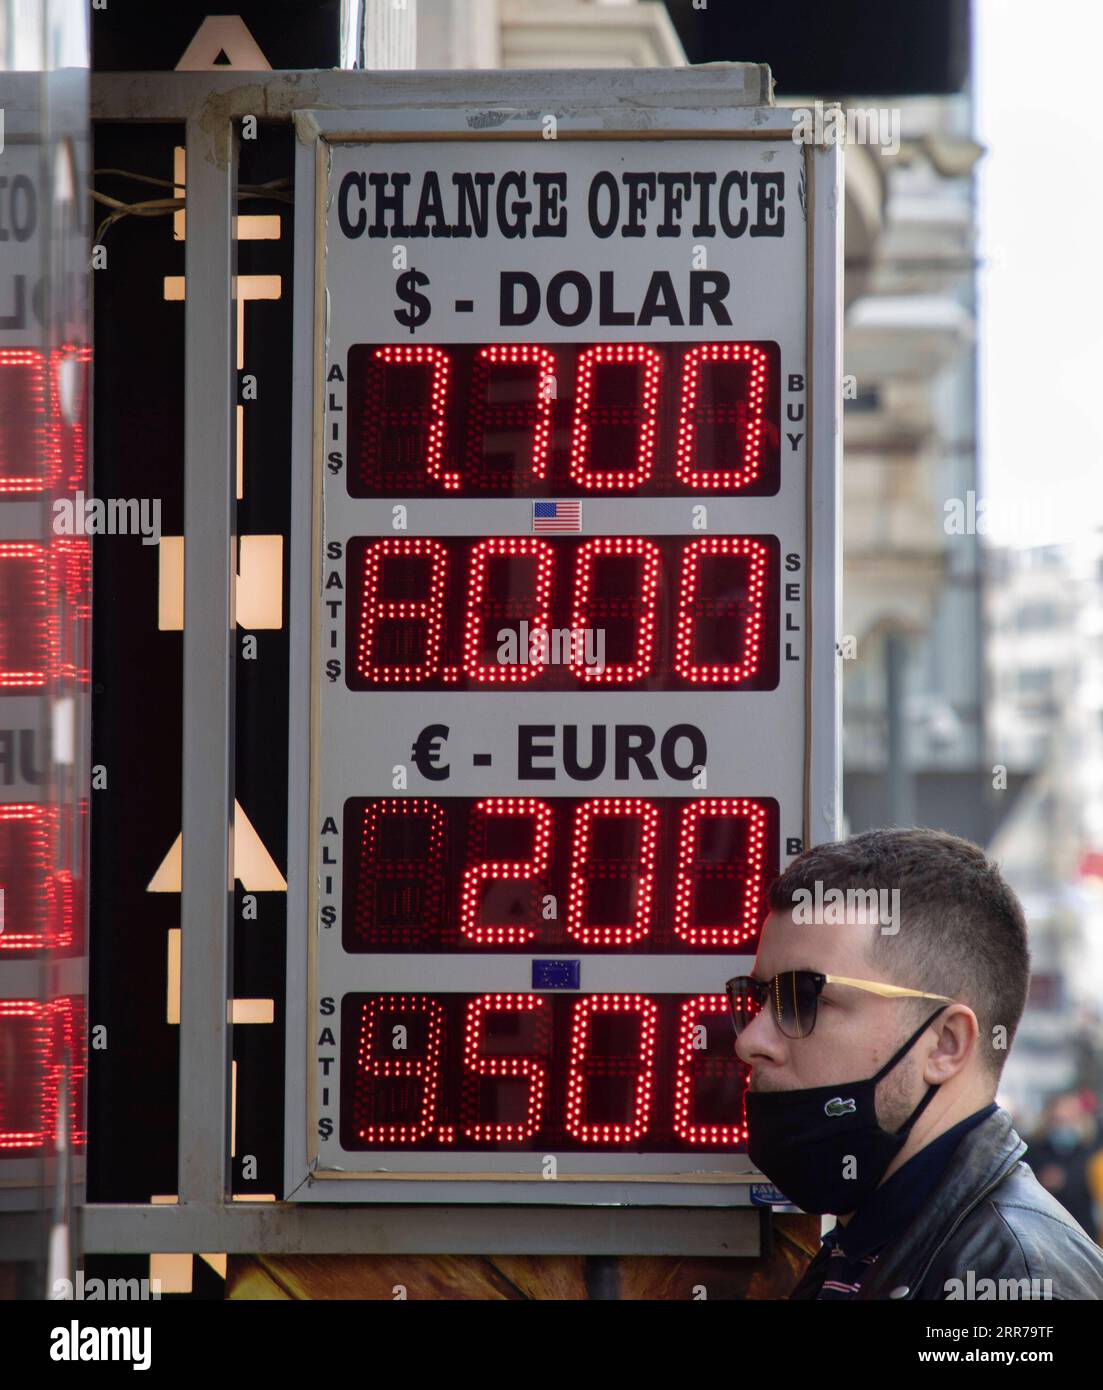 210322 -- ISTANBUL, March 22, 2021 -- A currency exchange s electronic screen shows foreign exchange rates in Istanbul, Turkey, on March 22, 2021. Turkey s currency plunged around 11 percent on Monday after Turkish President Recep Tayyip Erdogan fired the central bank governor and appointed a critic of high interest rates, a move sparking turbulence in markets. Turkish lira was fluctuating at 8.02 against the U.S. dollar in Monday s morning trading, a sharp decline from Friday s closing level of 7.22, while the Turkish currency was also down 11 percent against the euro. Photo by /Xinhua TURKEY Stock Photo